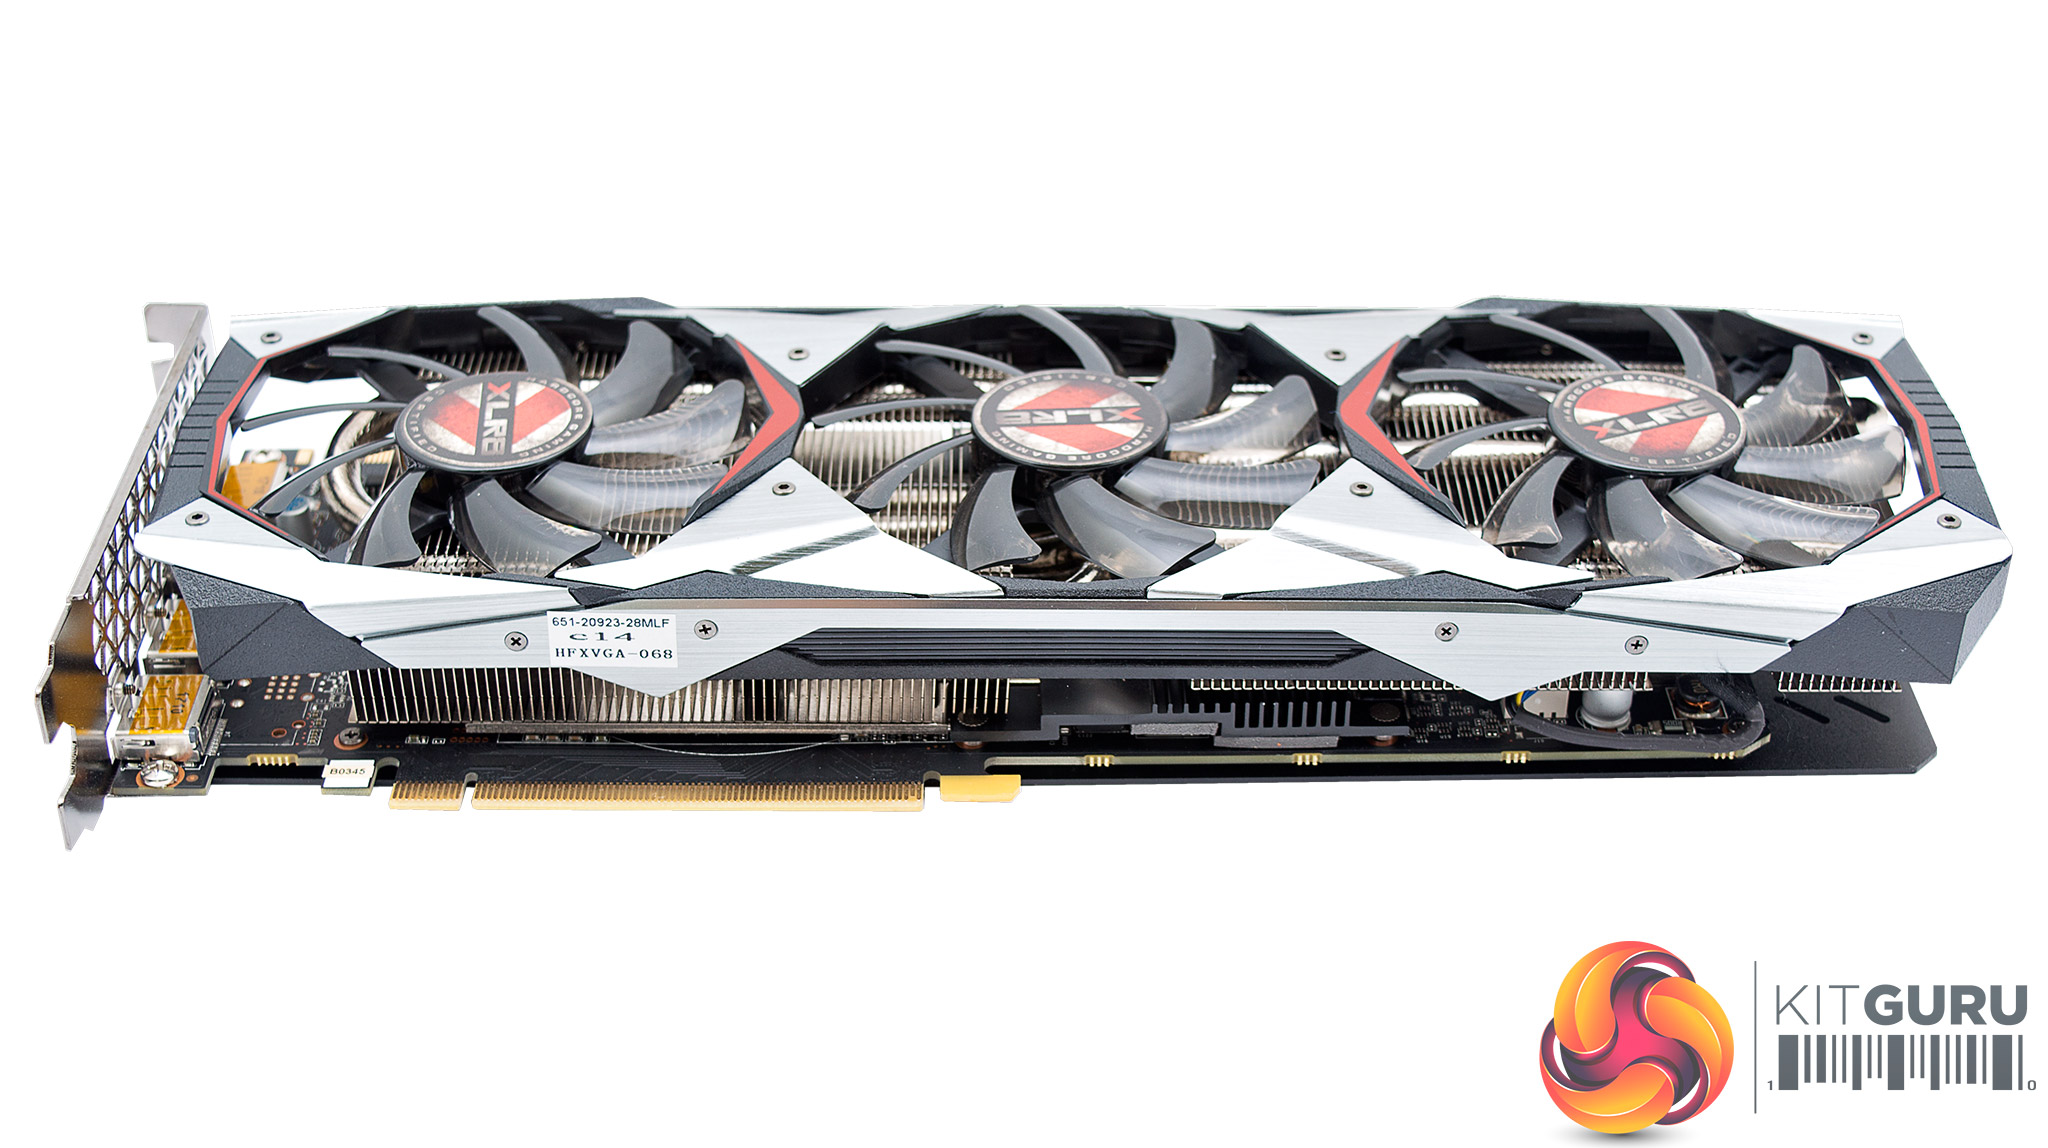 PNY GTX 1080 Ti XLR8 OC review: A gorgeous graphics card with